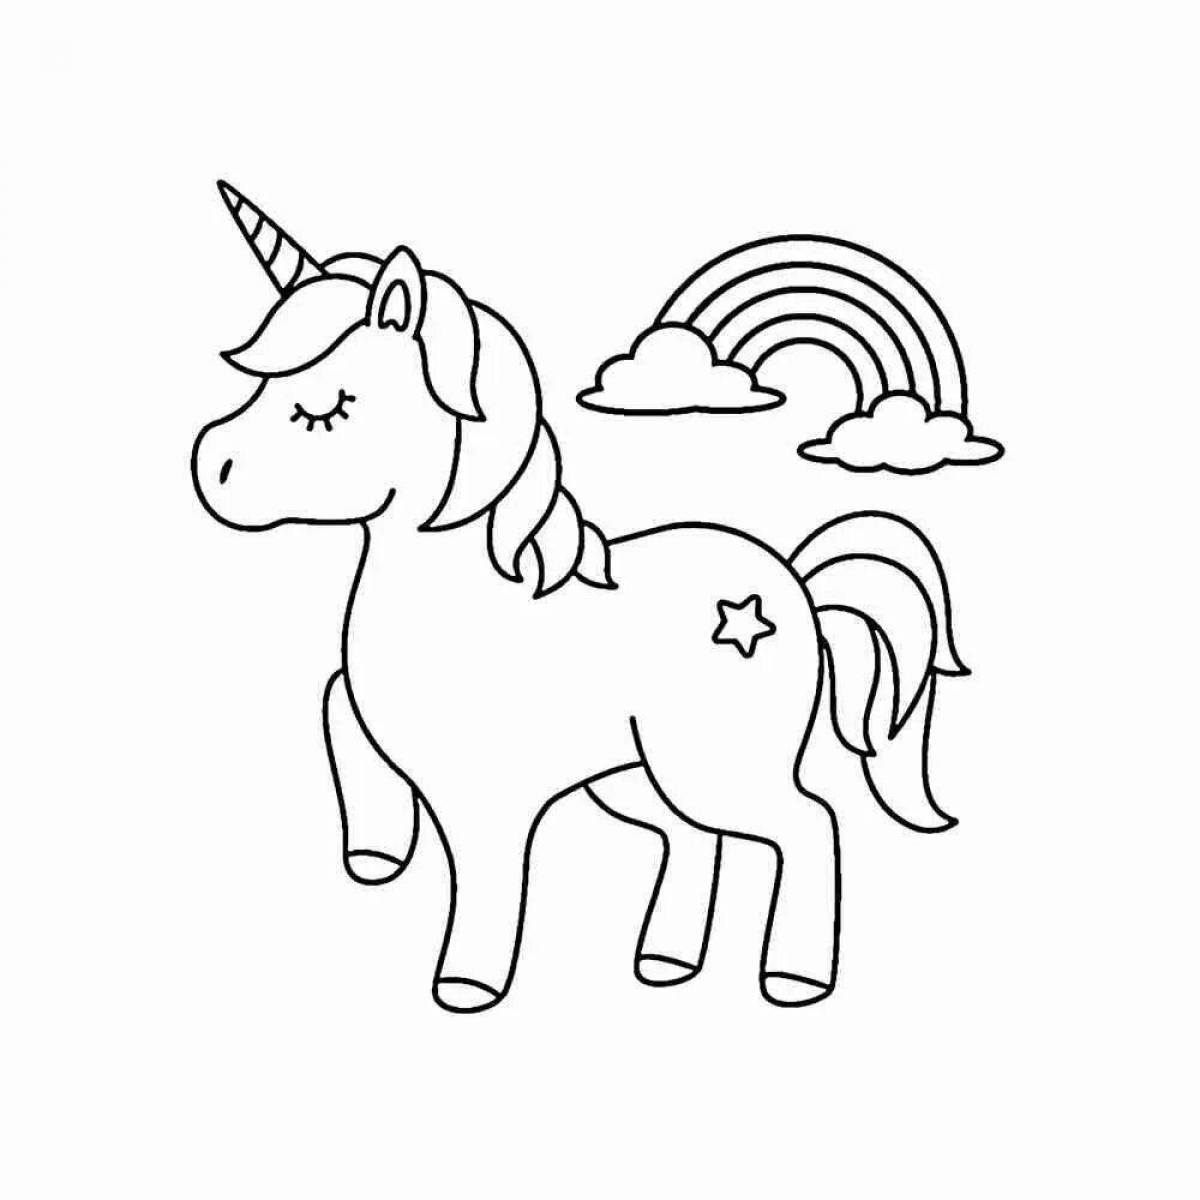 Awesome coloring book include unicorns